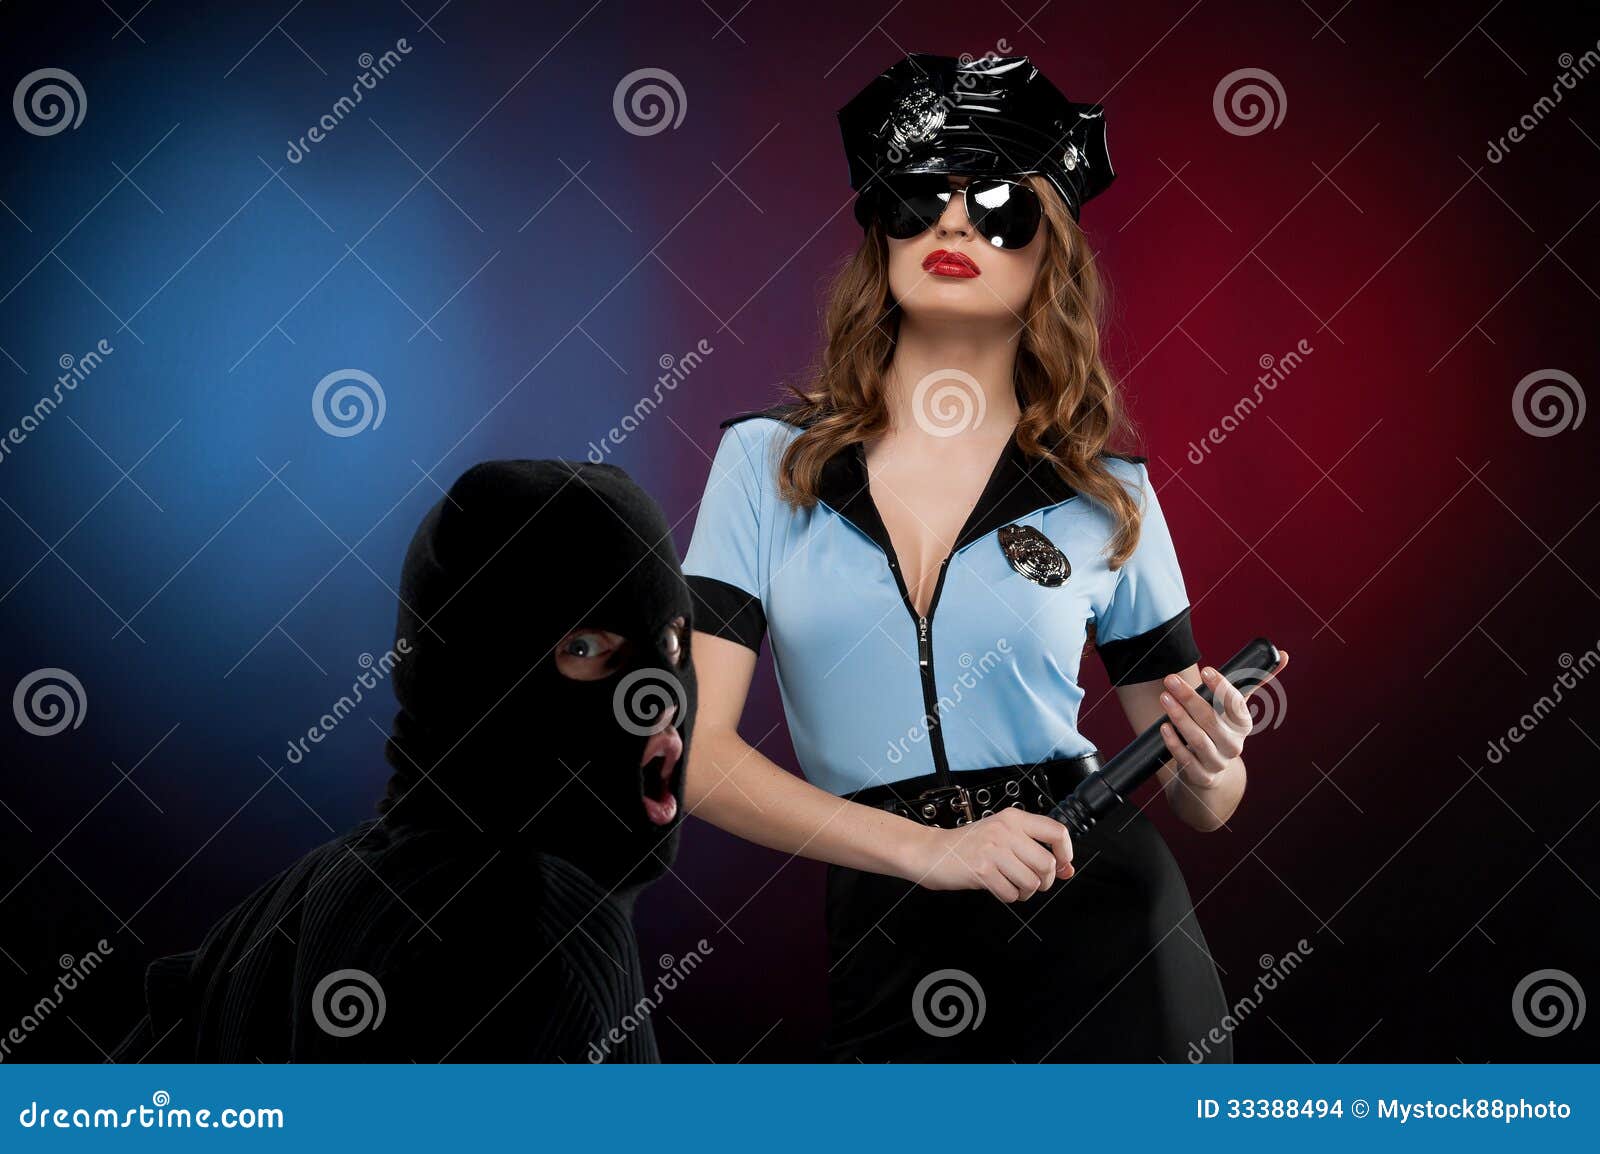 policewoman at work.